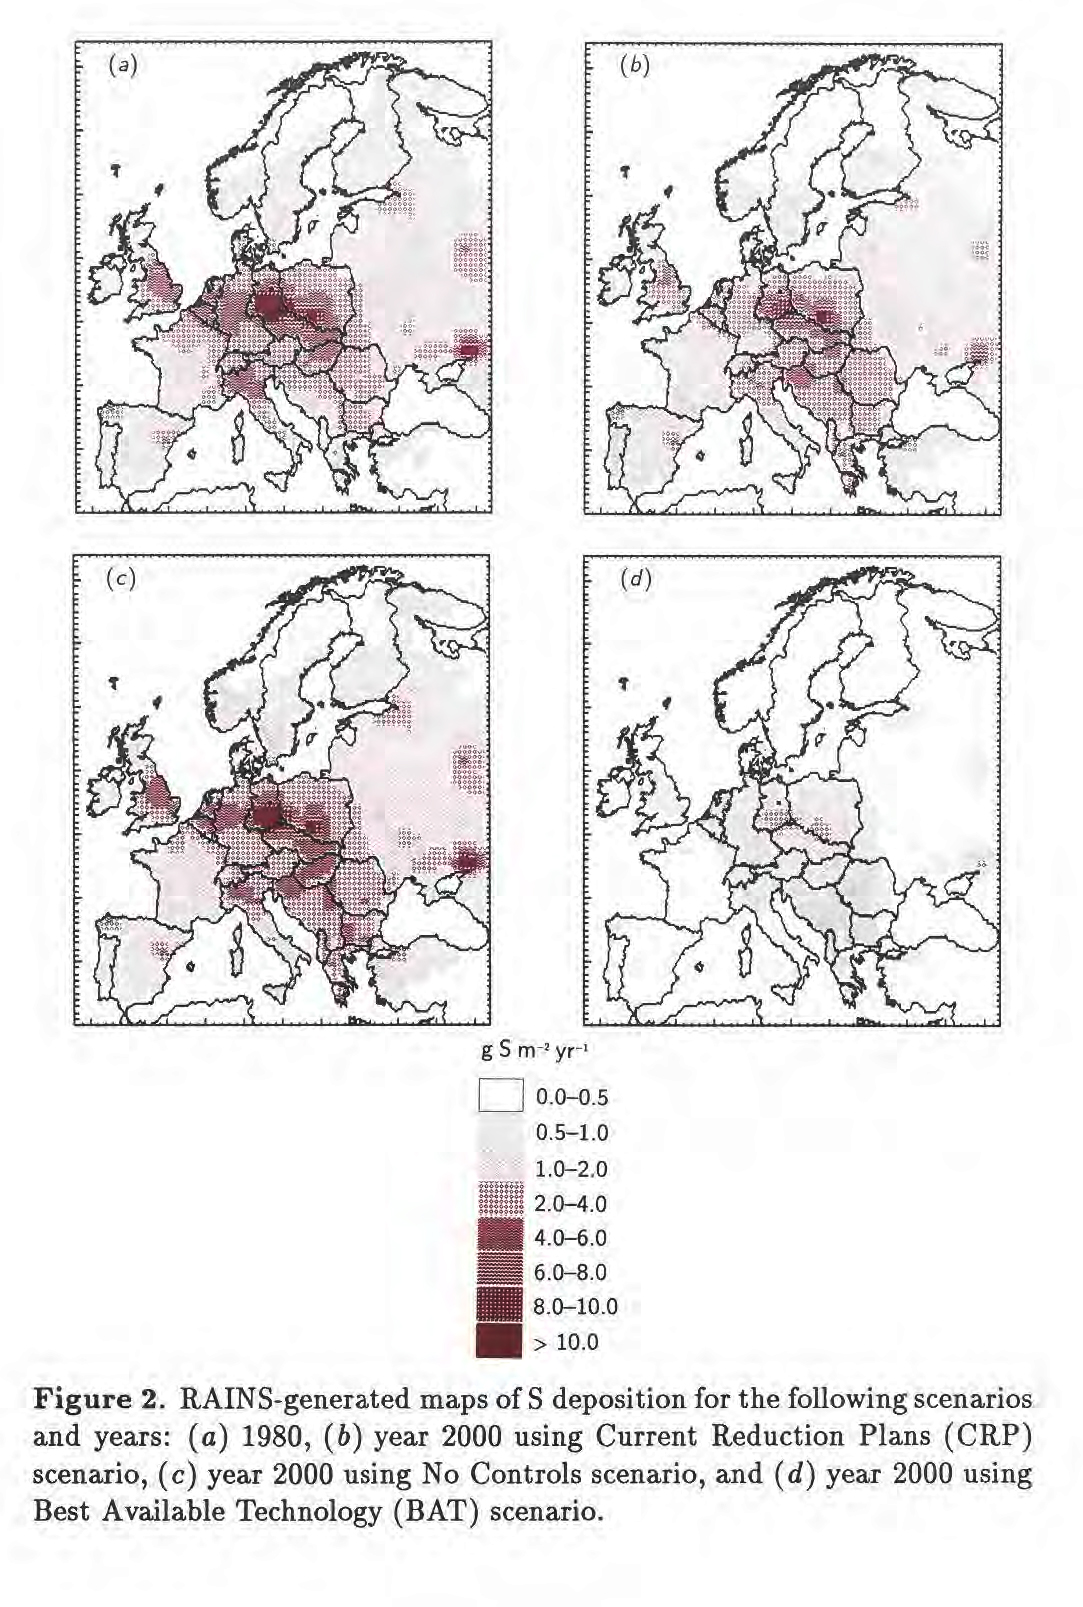 RAINS generated maps of sulphur emissions in Europe for various scenarios and years